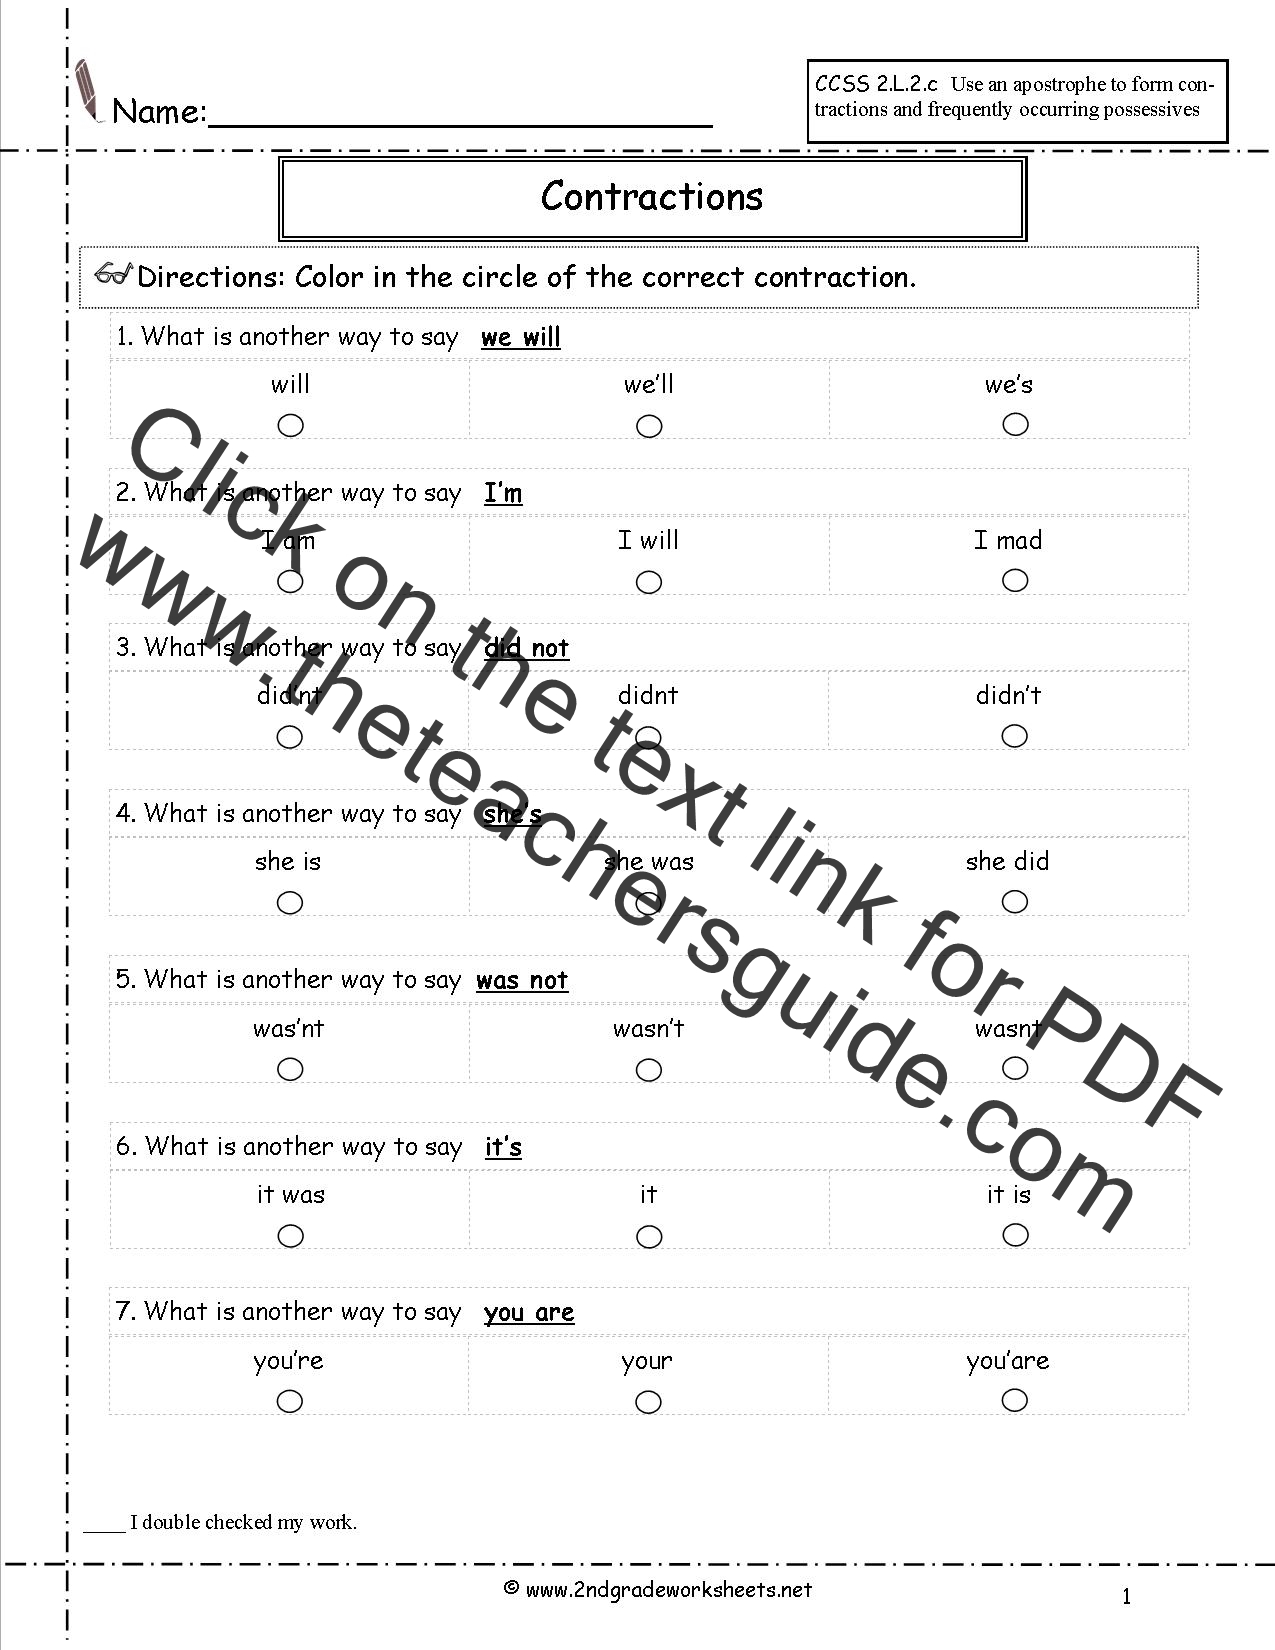 Free Contractions Worksheets and Printouts Intended For Contractions Worksheet 2nd Grade